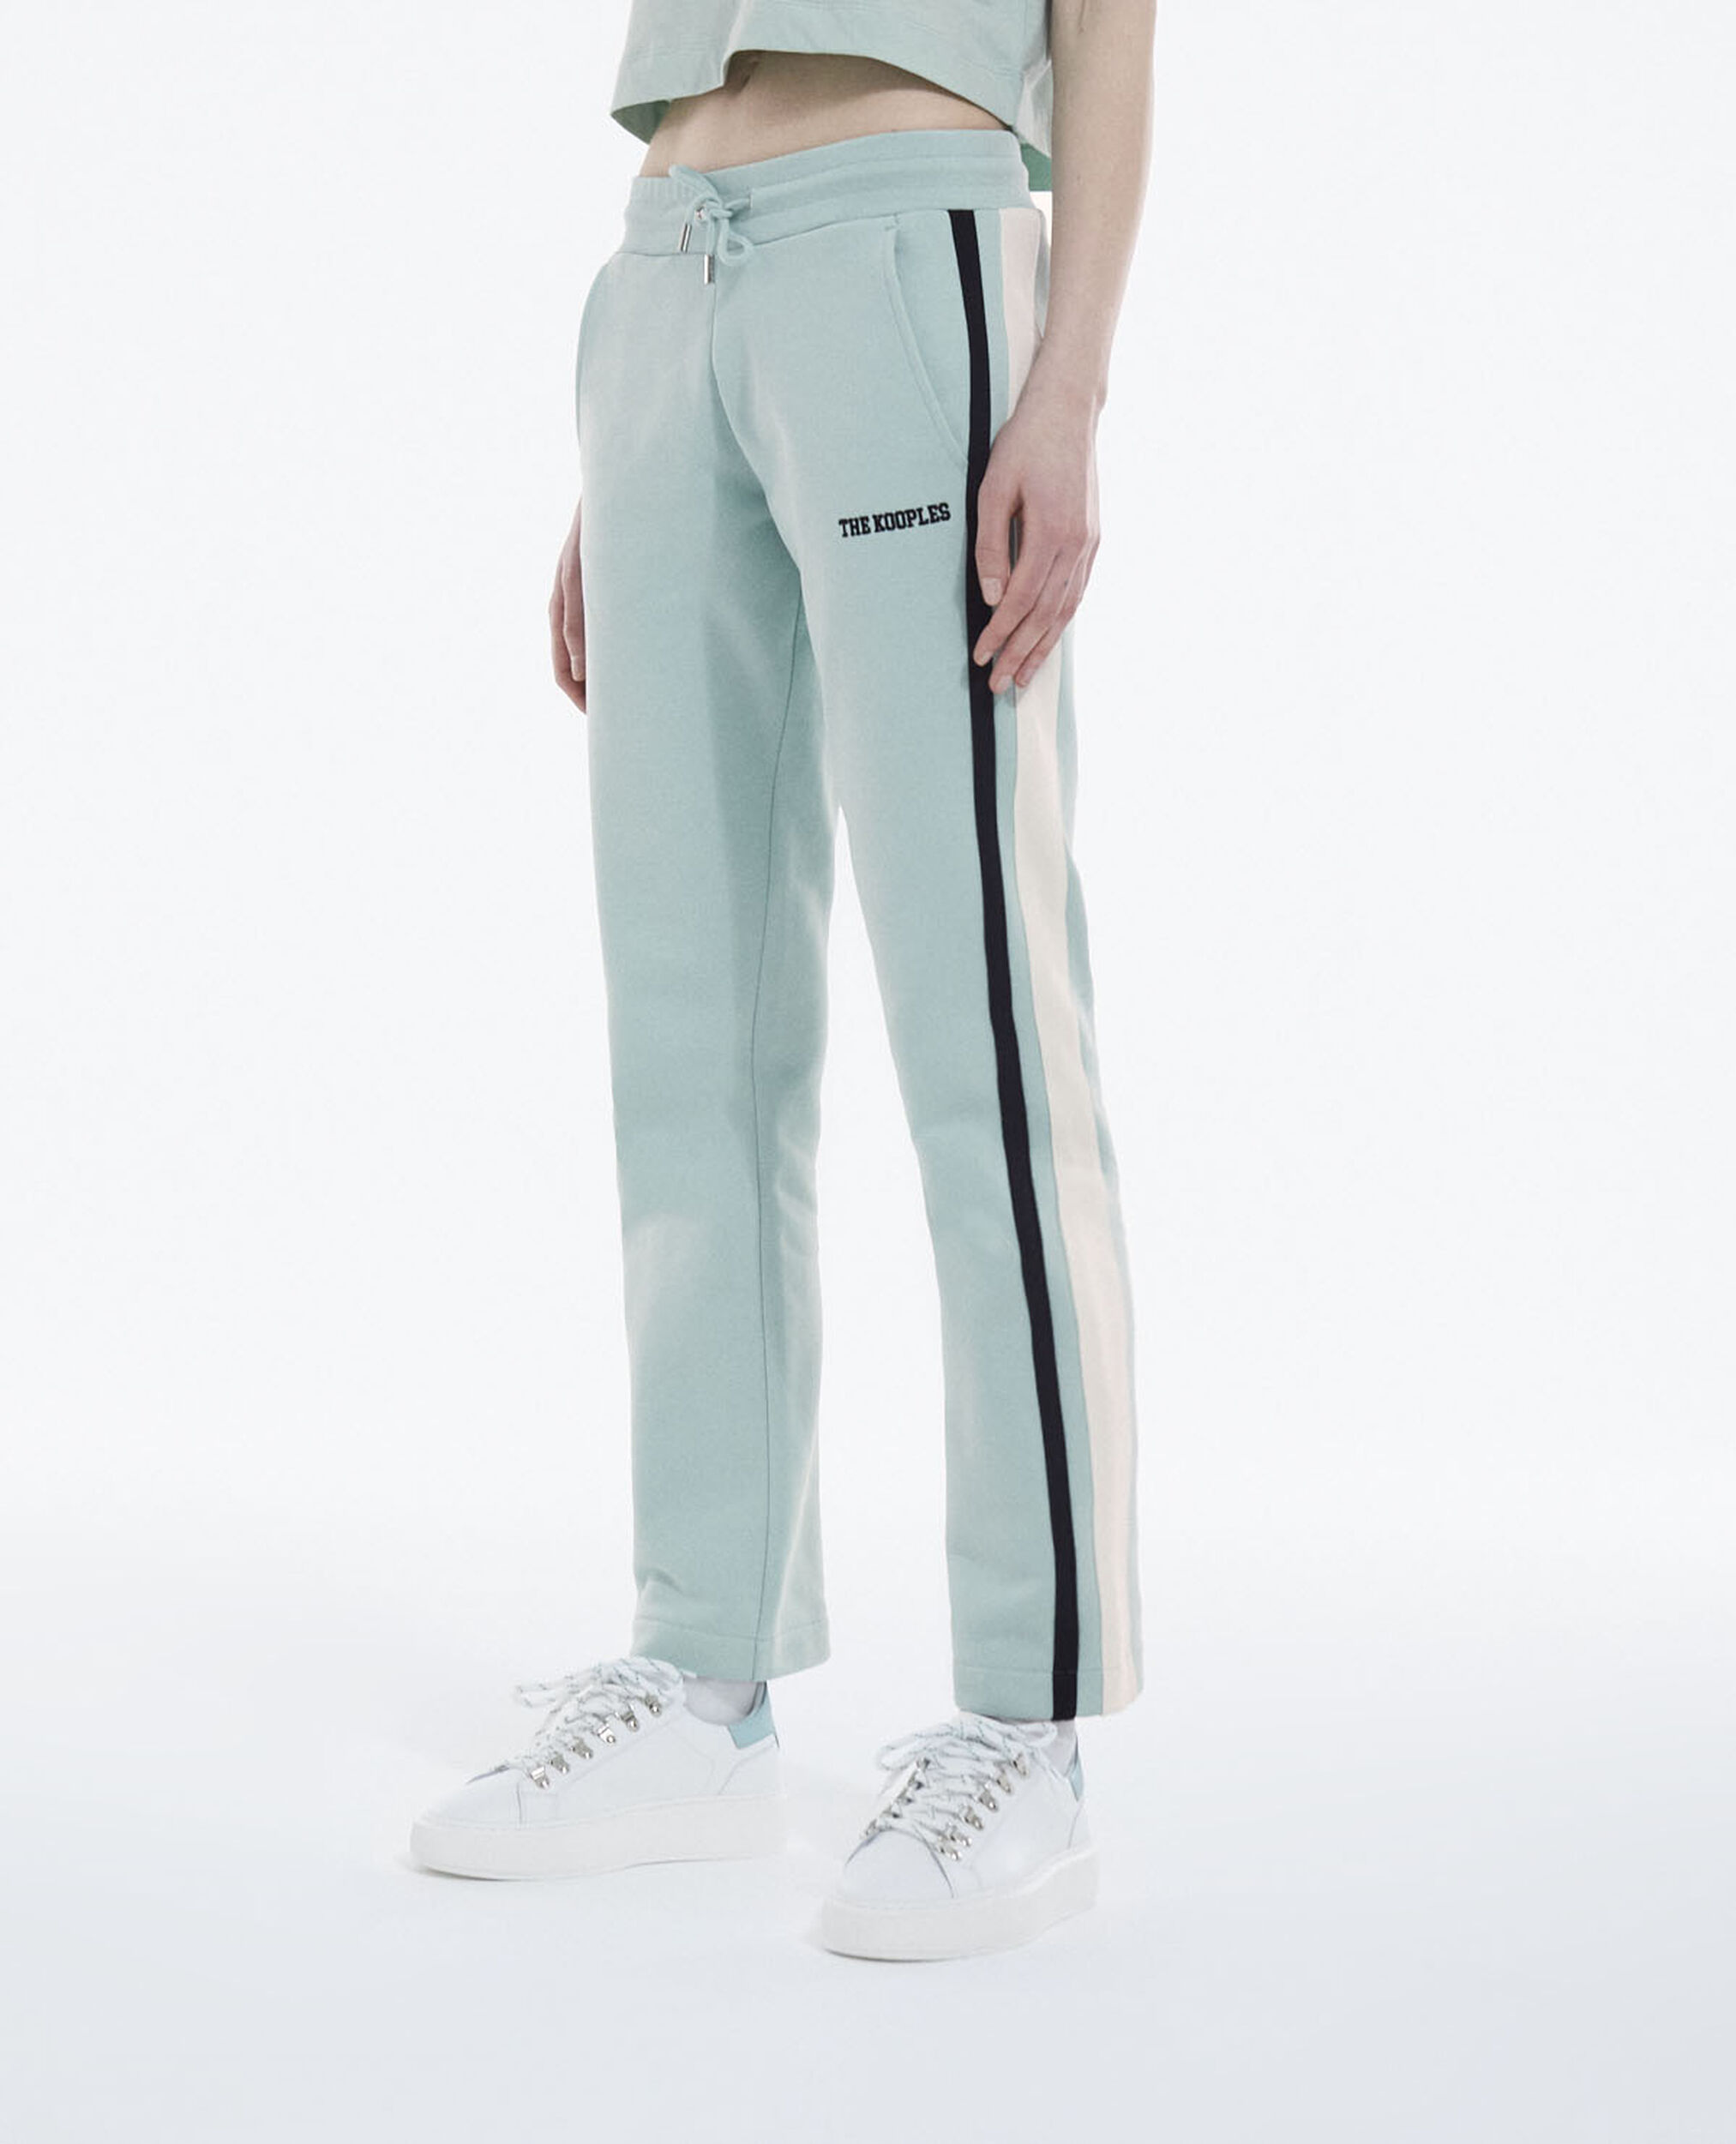 Blue joggers, BLUE / GREY, hi-res image number null